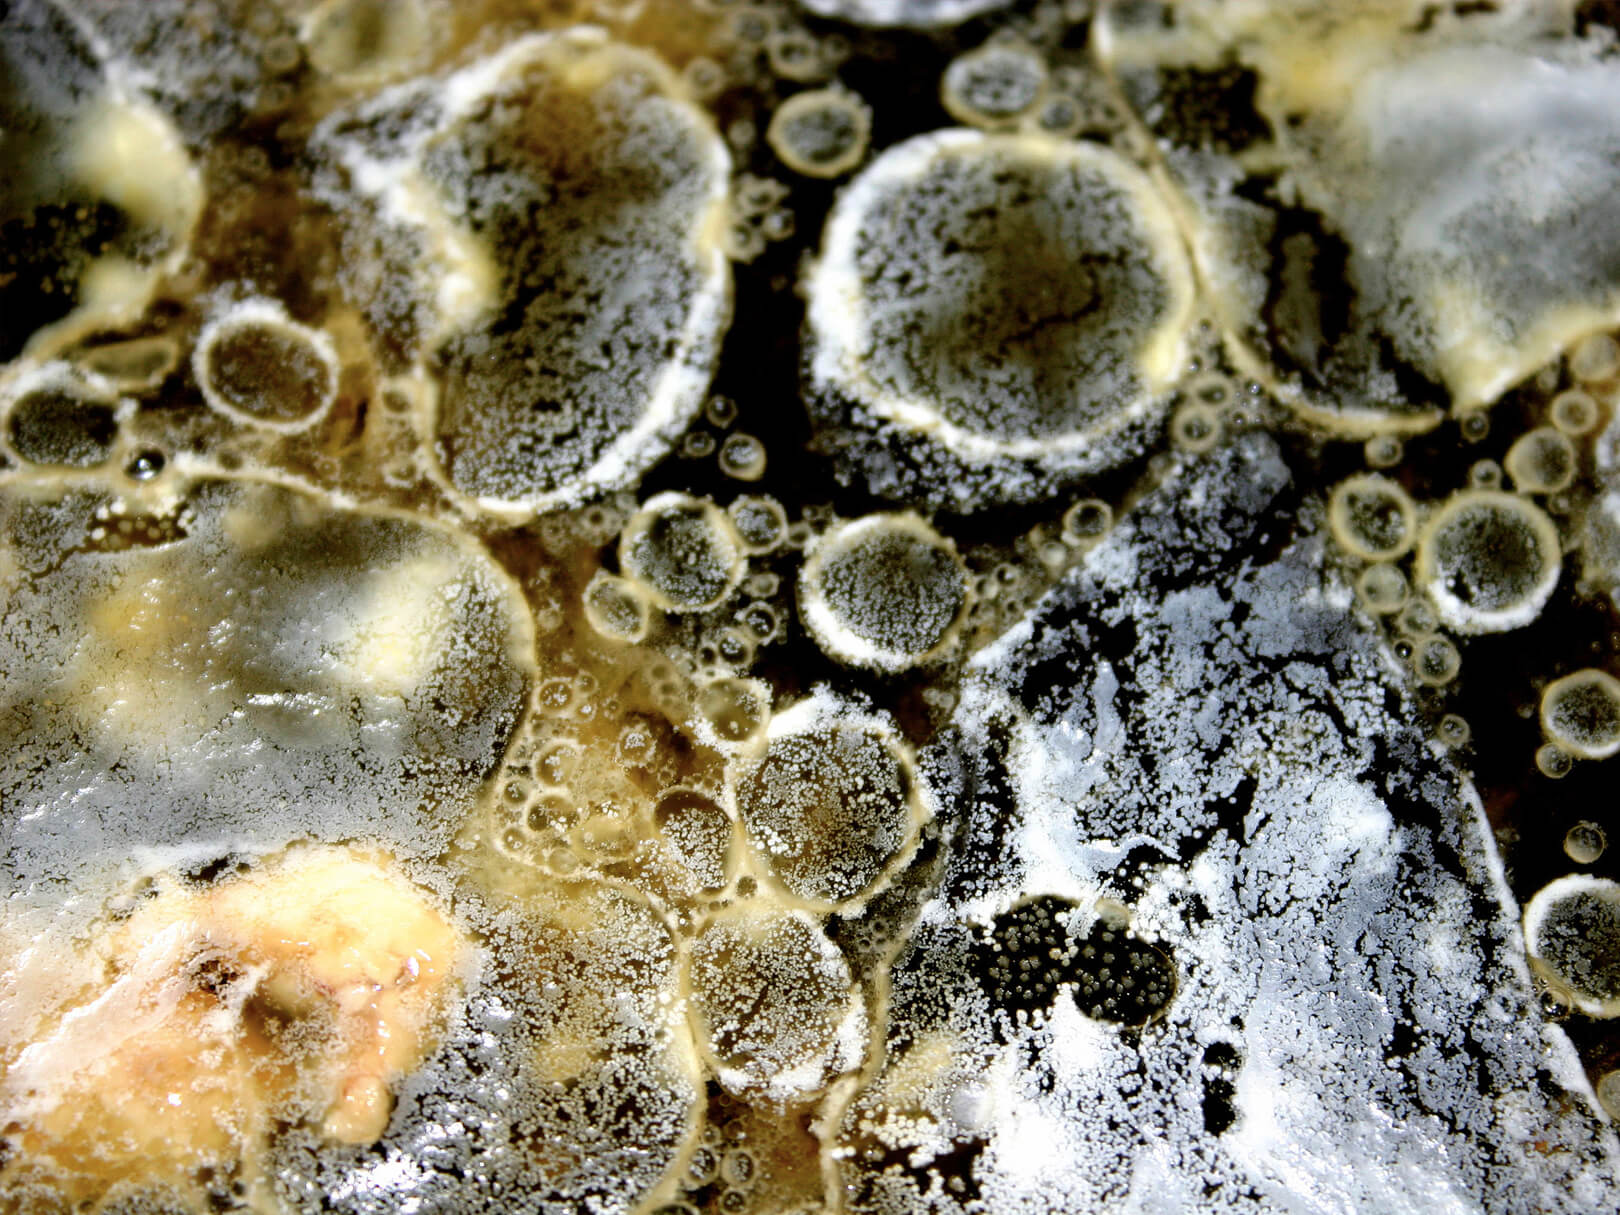 What does toxic mould look like?